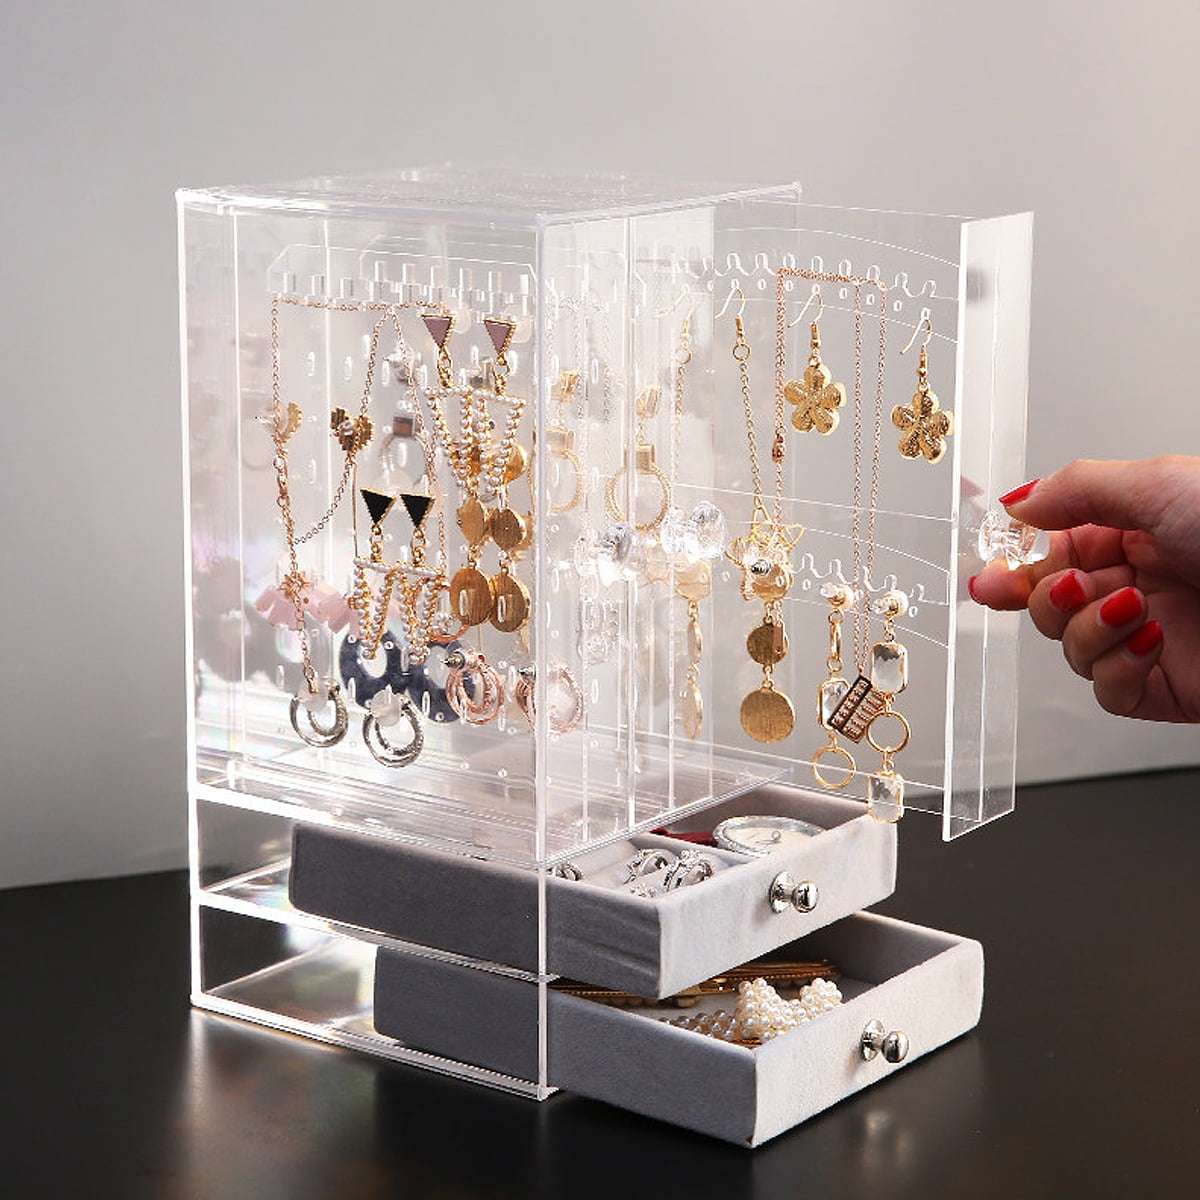 48/72 Holes Earring Ring Display Jewelry Rack Holder Organizer Stand Showcase 